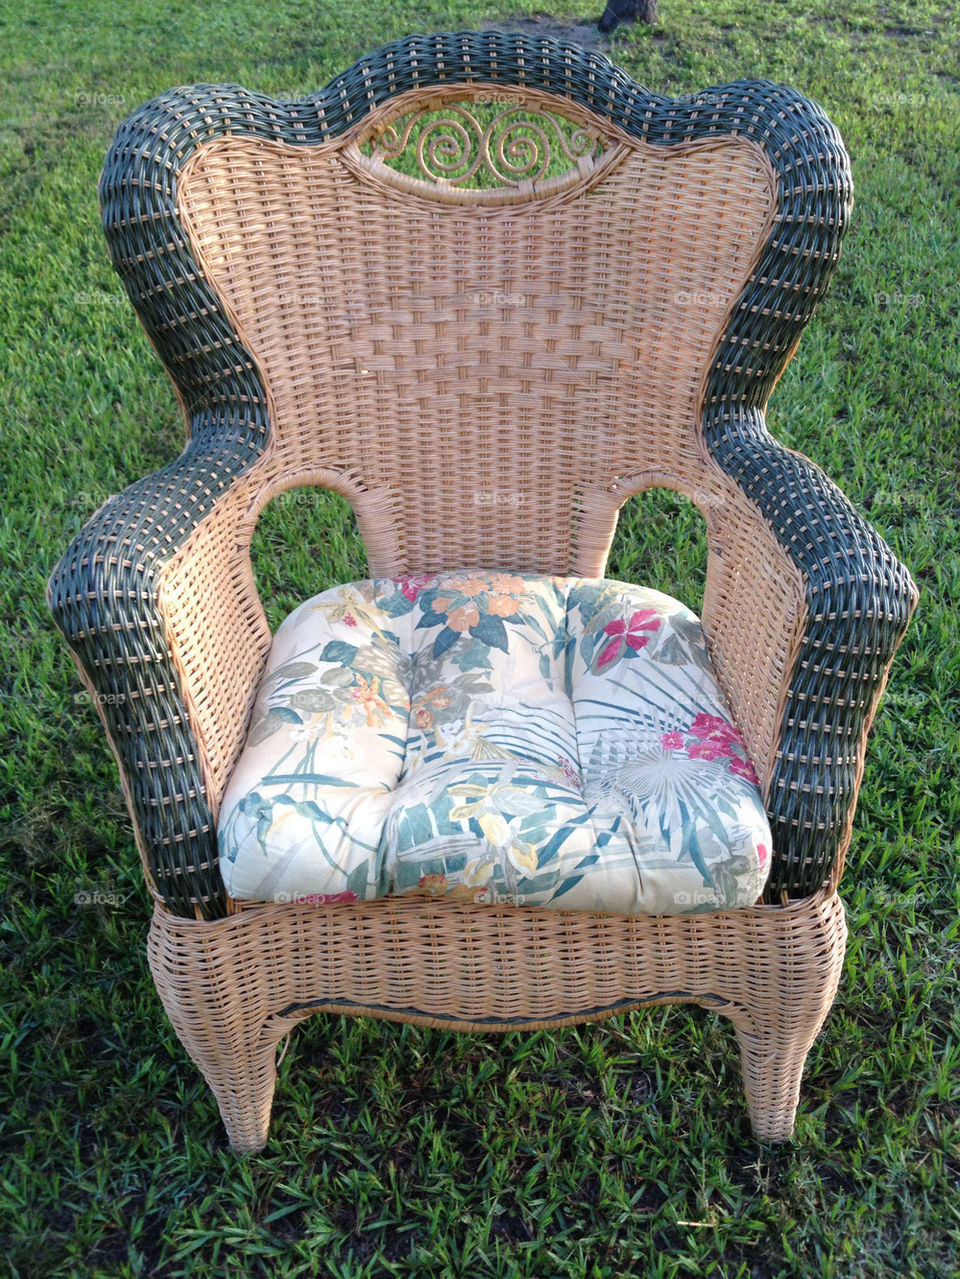 outdoor chair furniture lawn by sug021408